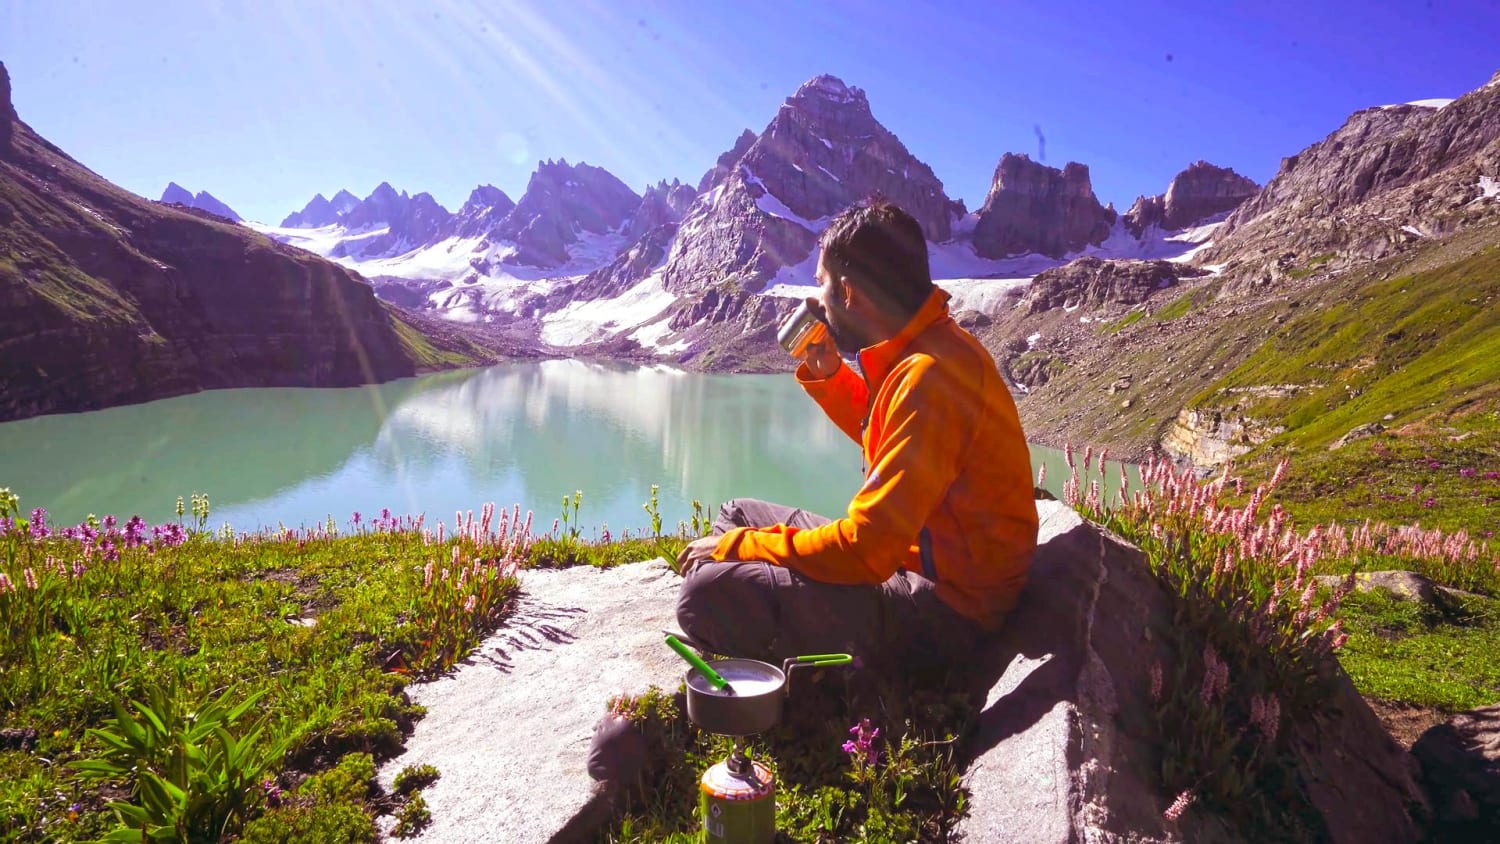 A tranquil high-altitude lake surrounded by wildflower meadows & towering mountains. But most importantly, freshly brewed tea!